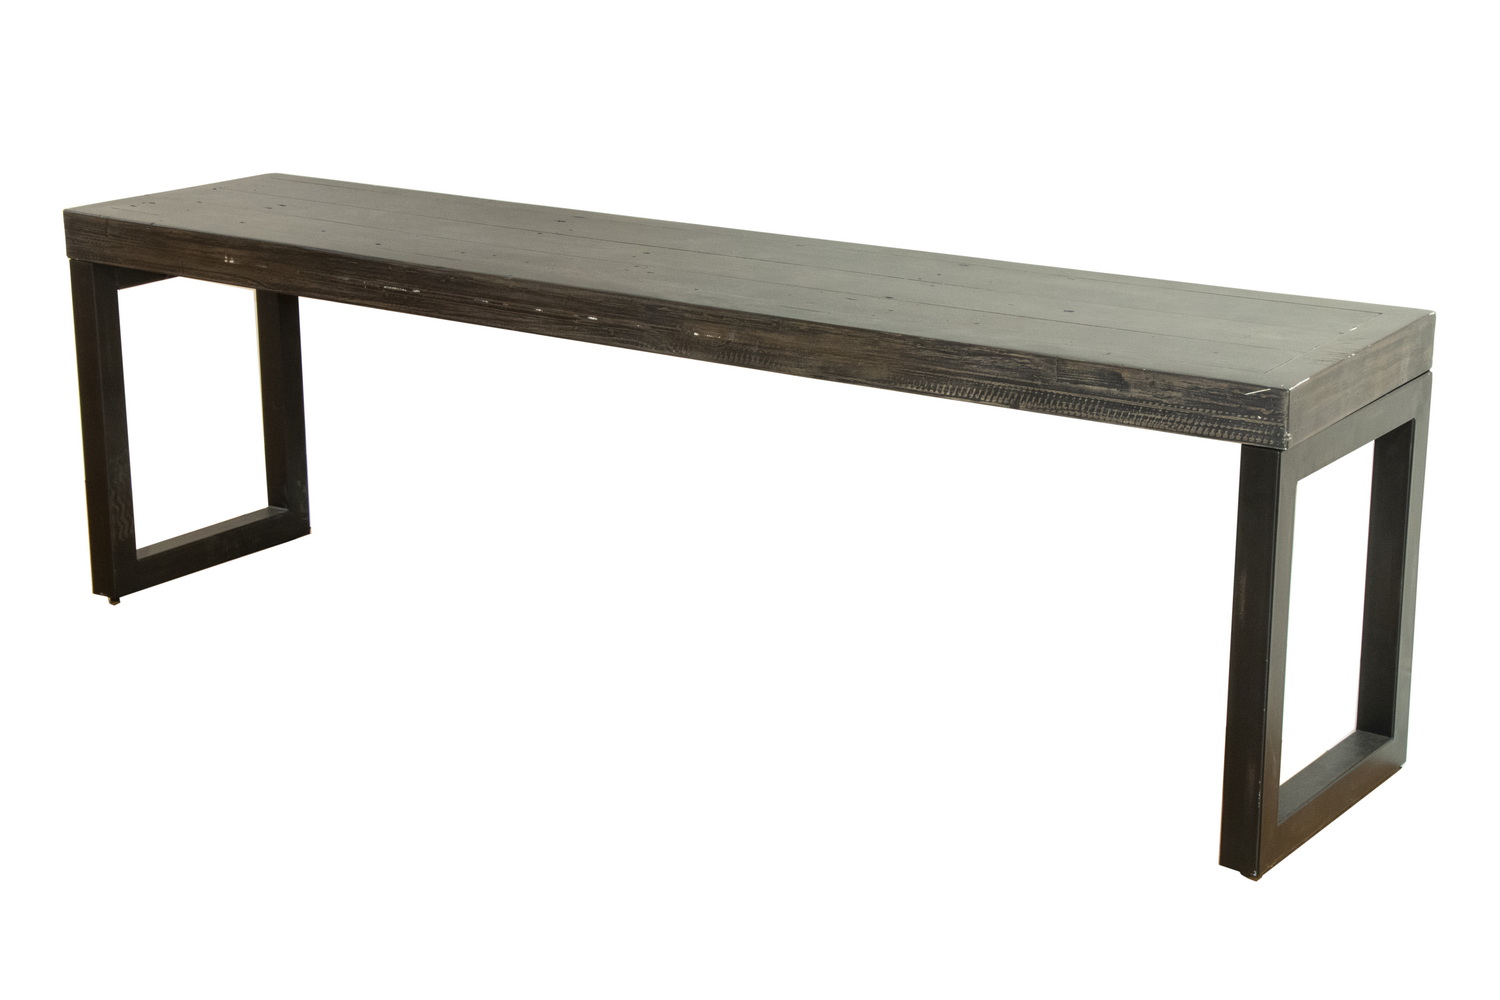 PAINTED LONG BENCH BY P G T RECLAIMED 33d469